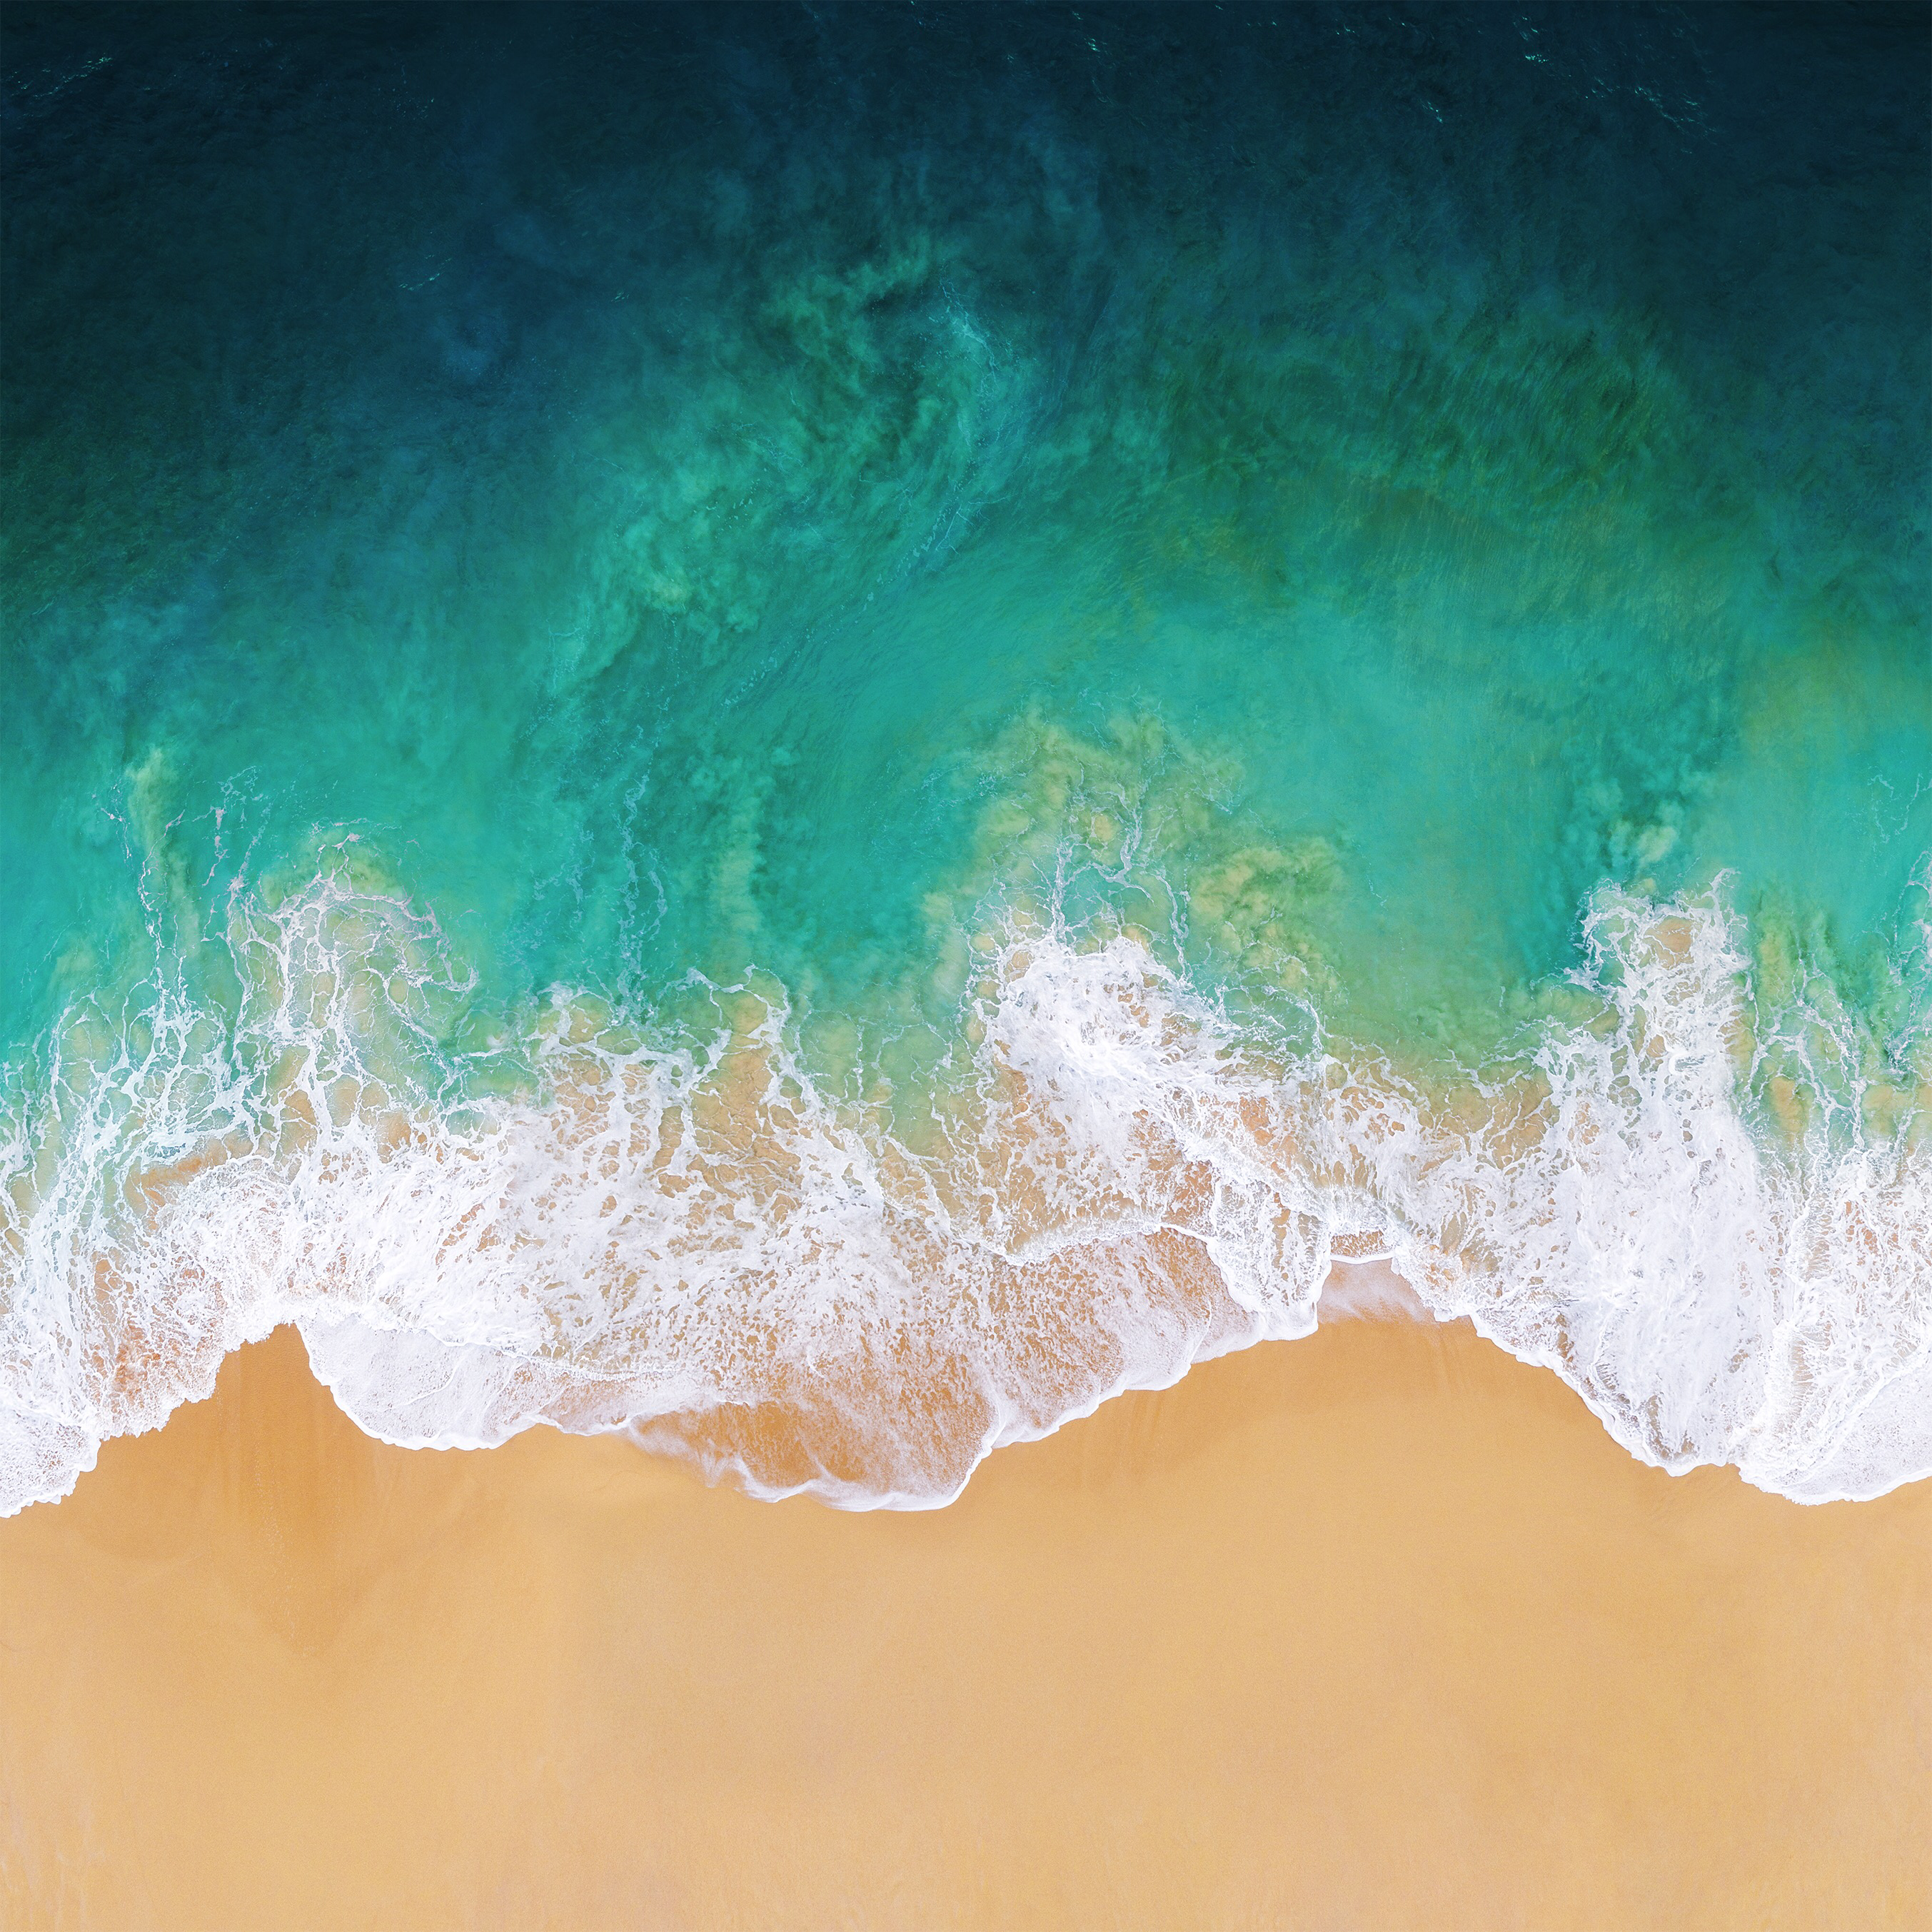 Download The Real Ios 11 Wallpaper For Iphone Iclarified